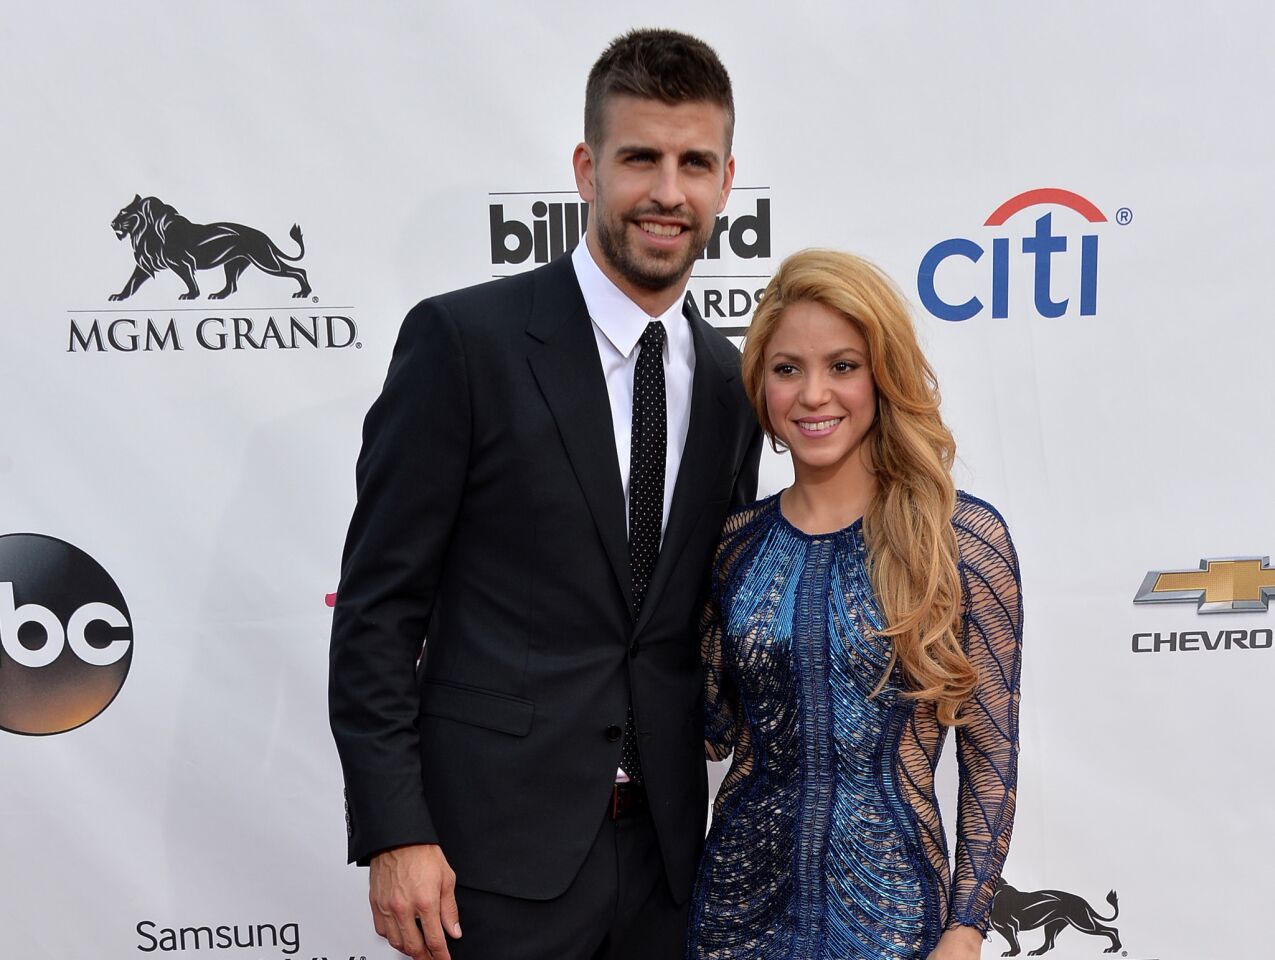 It's another boy named Sasha for singer Shakira and soccer player boyfriend Gerard Pique. The pair, who are parents to toddler Milan, met in 2010 when Shakira promoted her World Cup anthem "Waka Waka (This Time for Africa)."